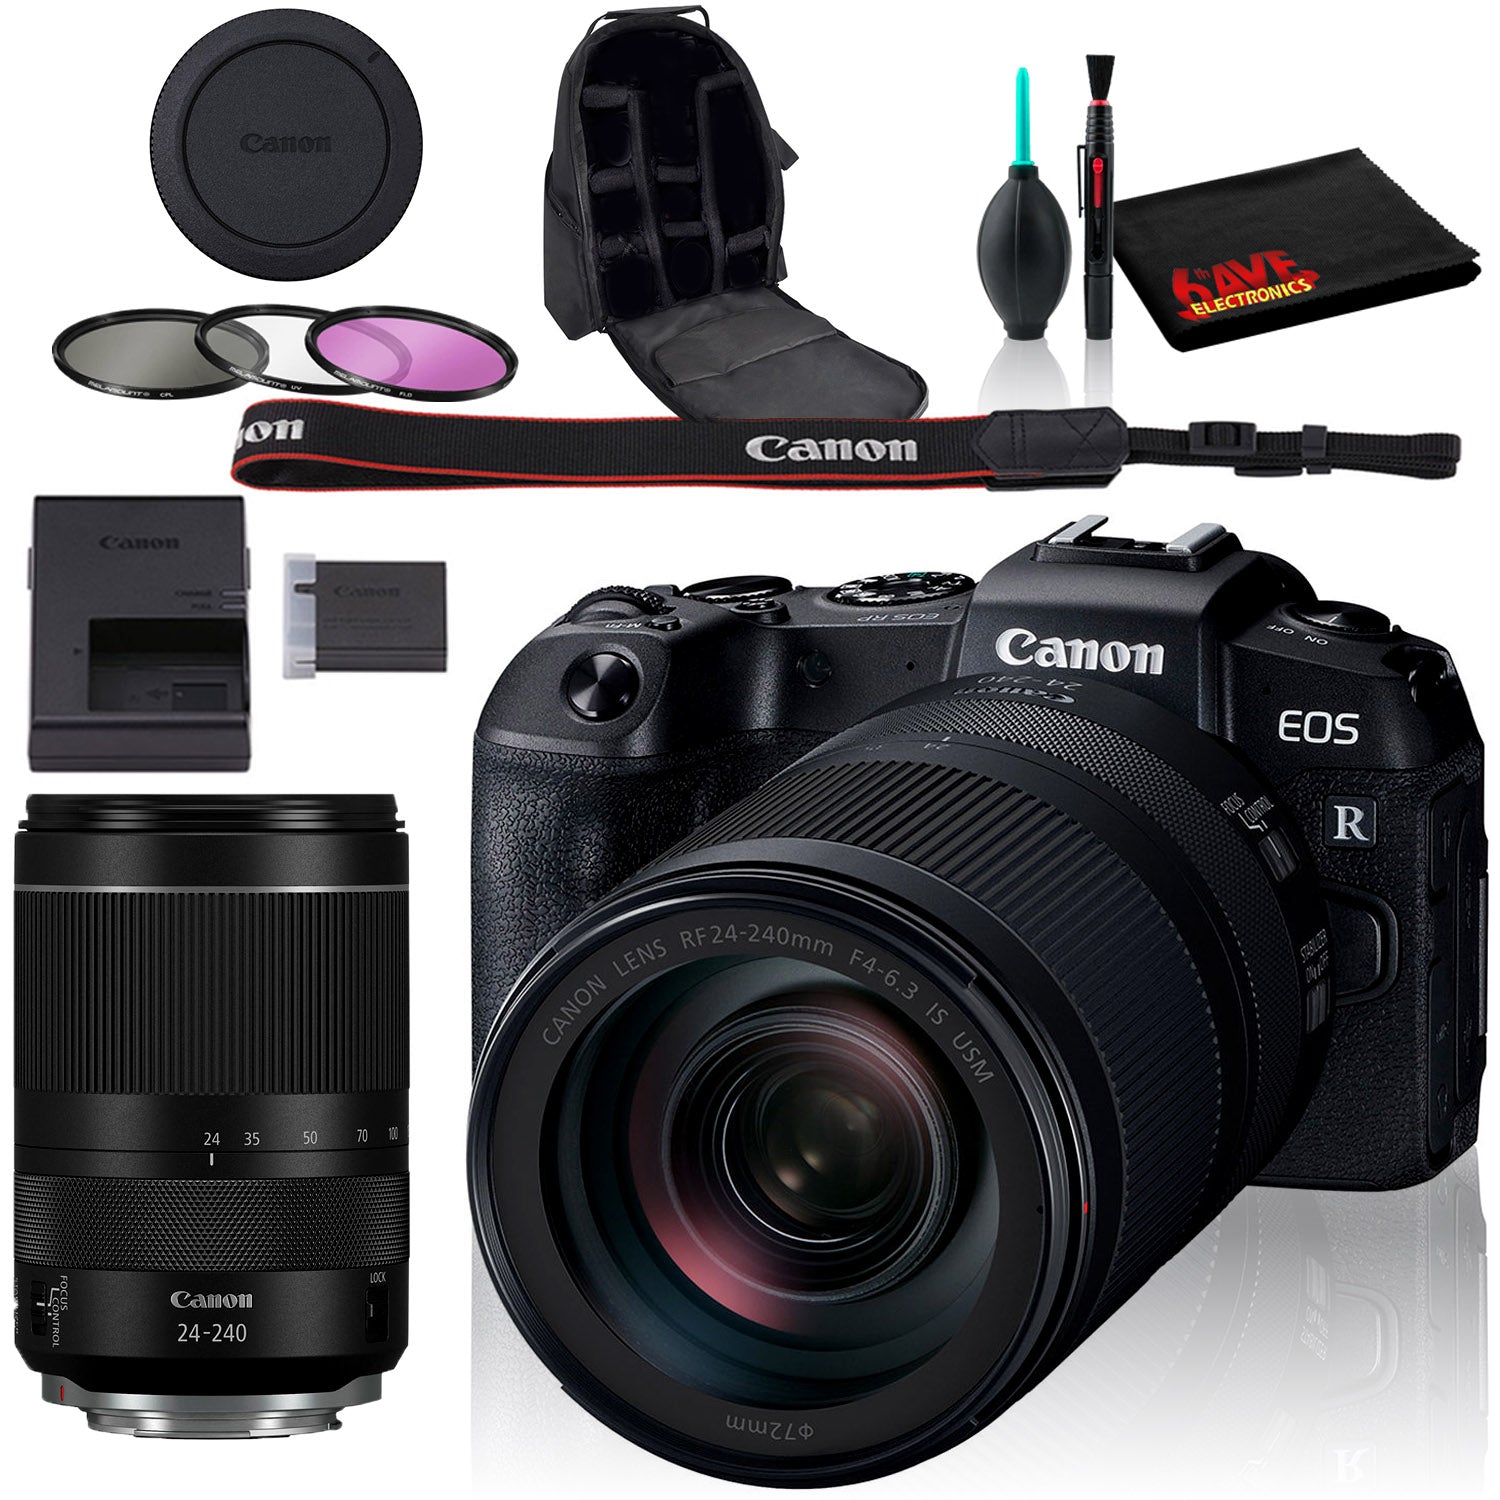 Canon EOS RP Mirrorless Digital Camera with 24-240mm Lens, Backpack Case, Cleaning Kit, and Filter Kit